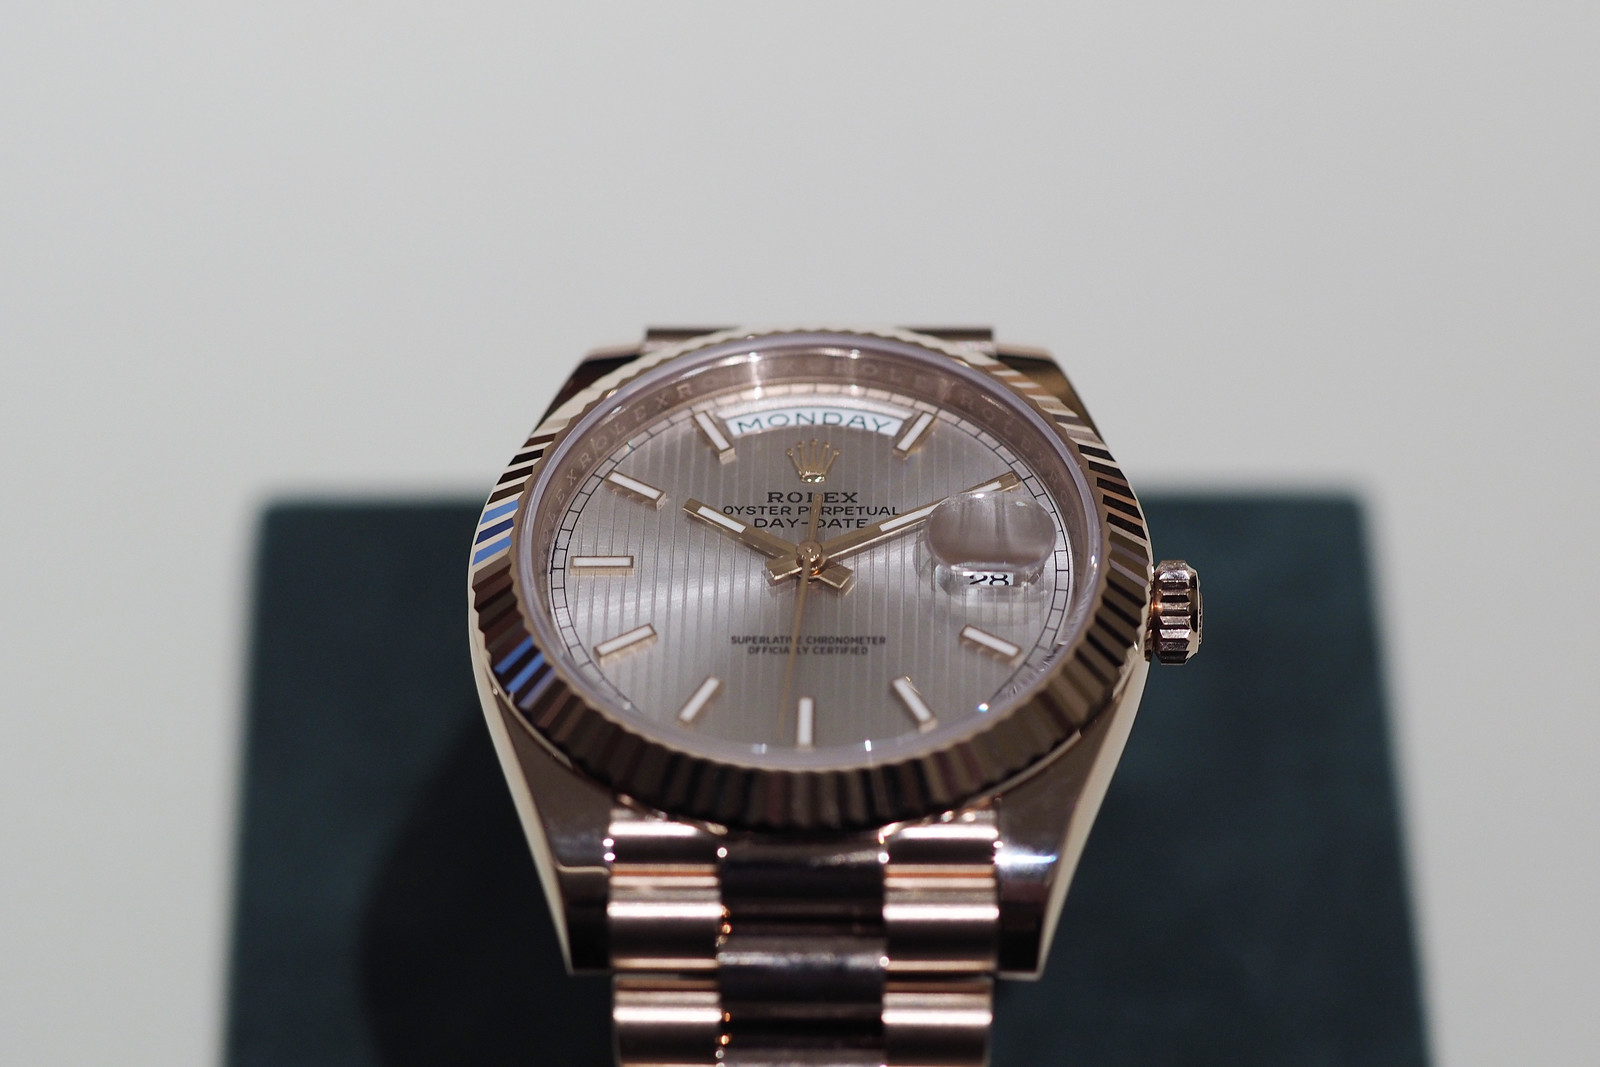 rolex day date 40 white gold review